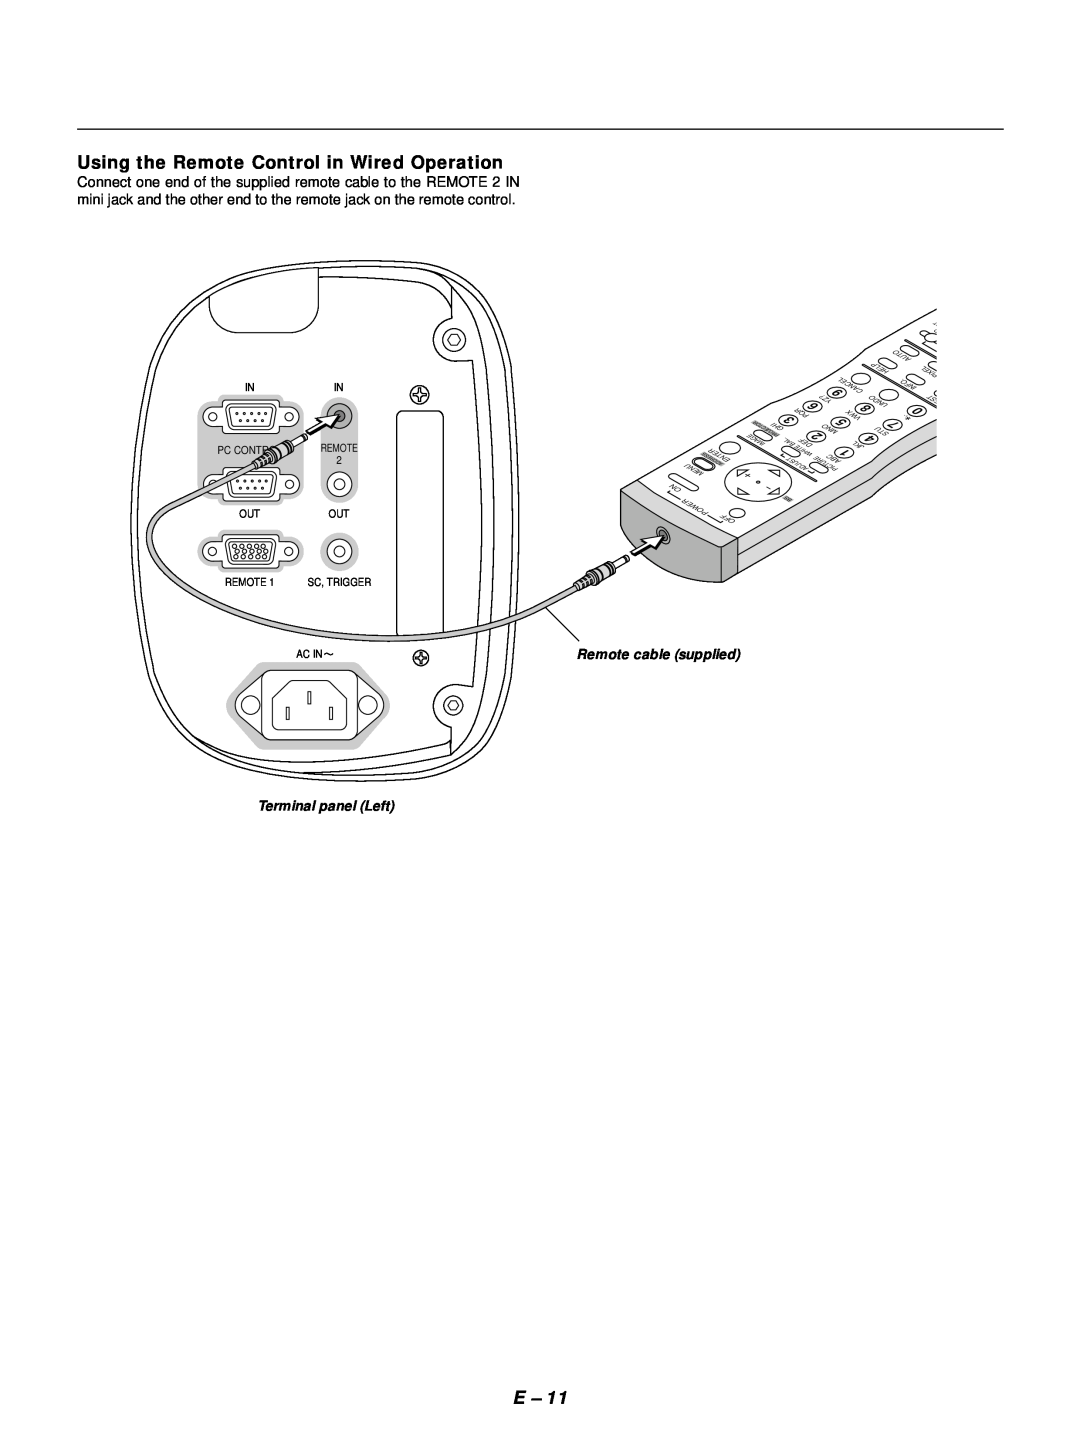 NEC GT1150 user manual Using the Remote Control in Wired Operation, Remote cable supplied, Terminal panel Left 